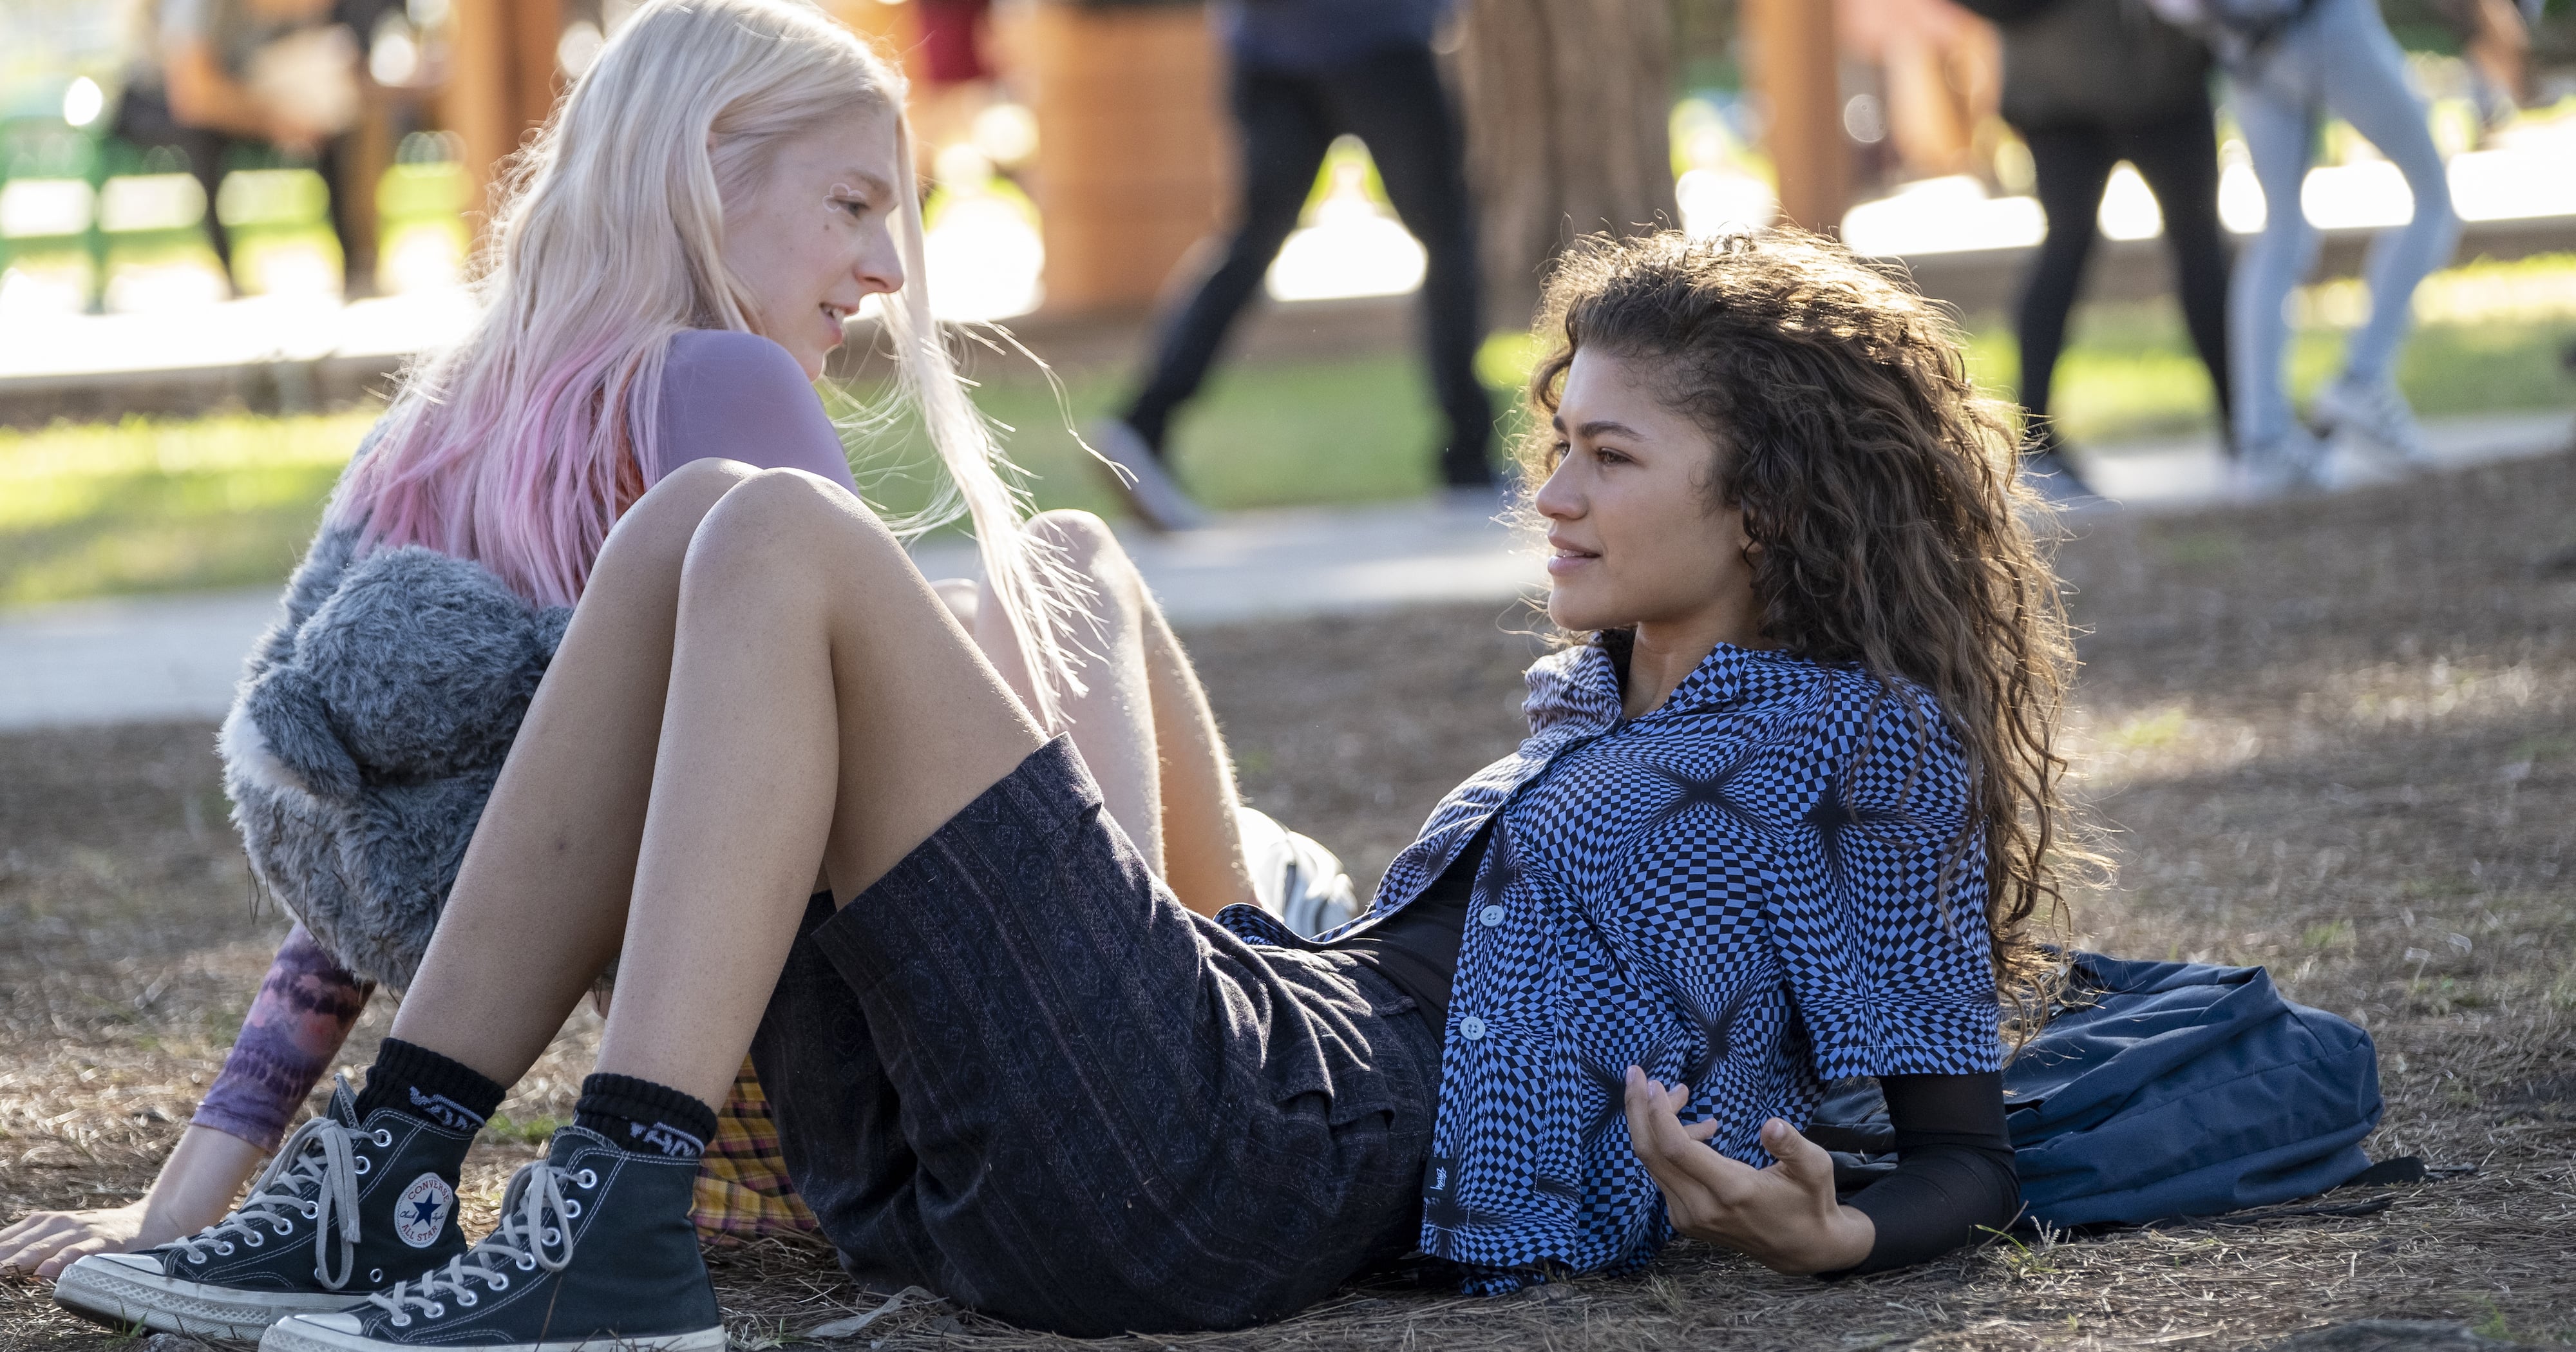 All the best outfits from season two of Euphoria